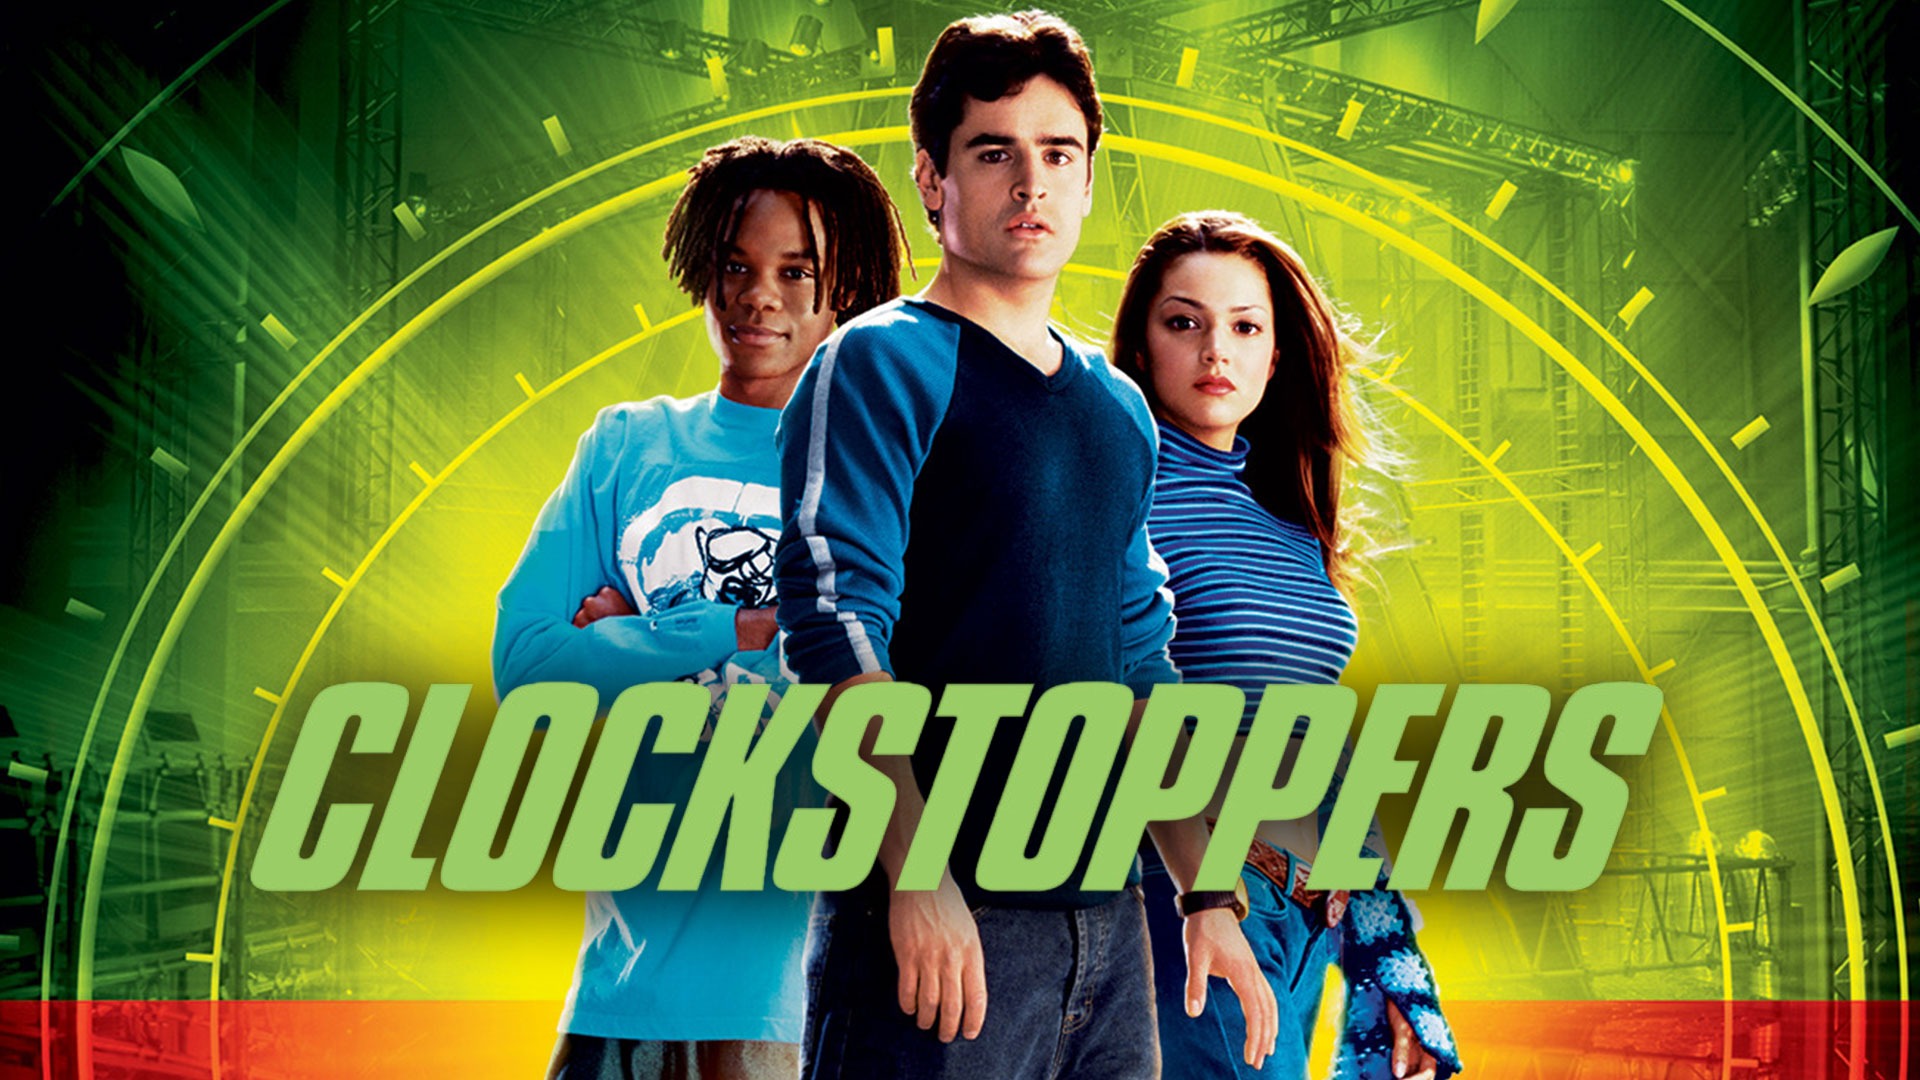 Paramount Pictures (90th Anniversary) / Nickelodeon Movies (2002/ Clockstoppers Variant) on Vimeo